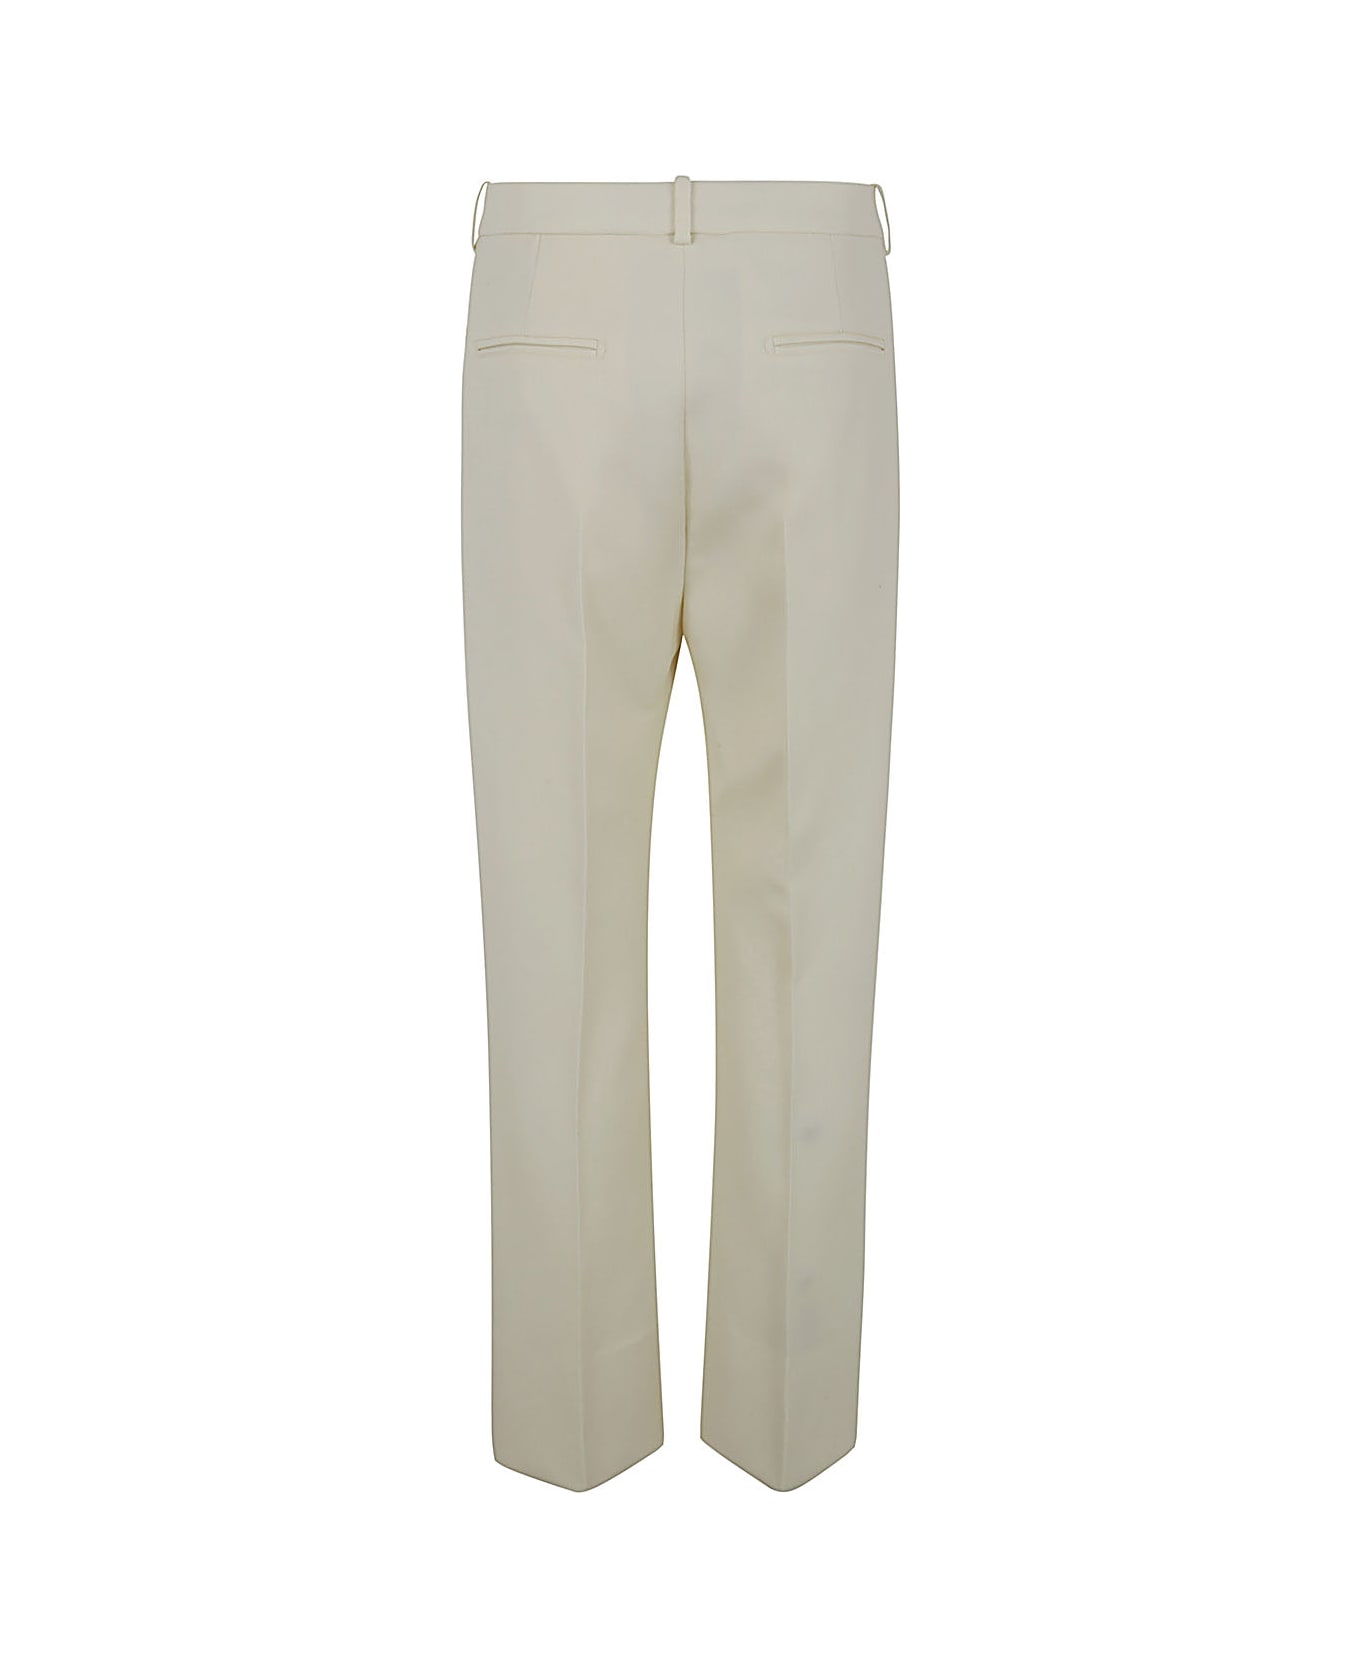 Tom Ford Wool And Silk Blend Twill Tailored Pants - Ecru ボトムス